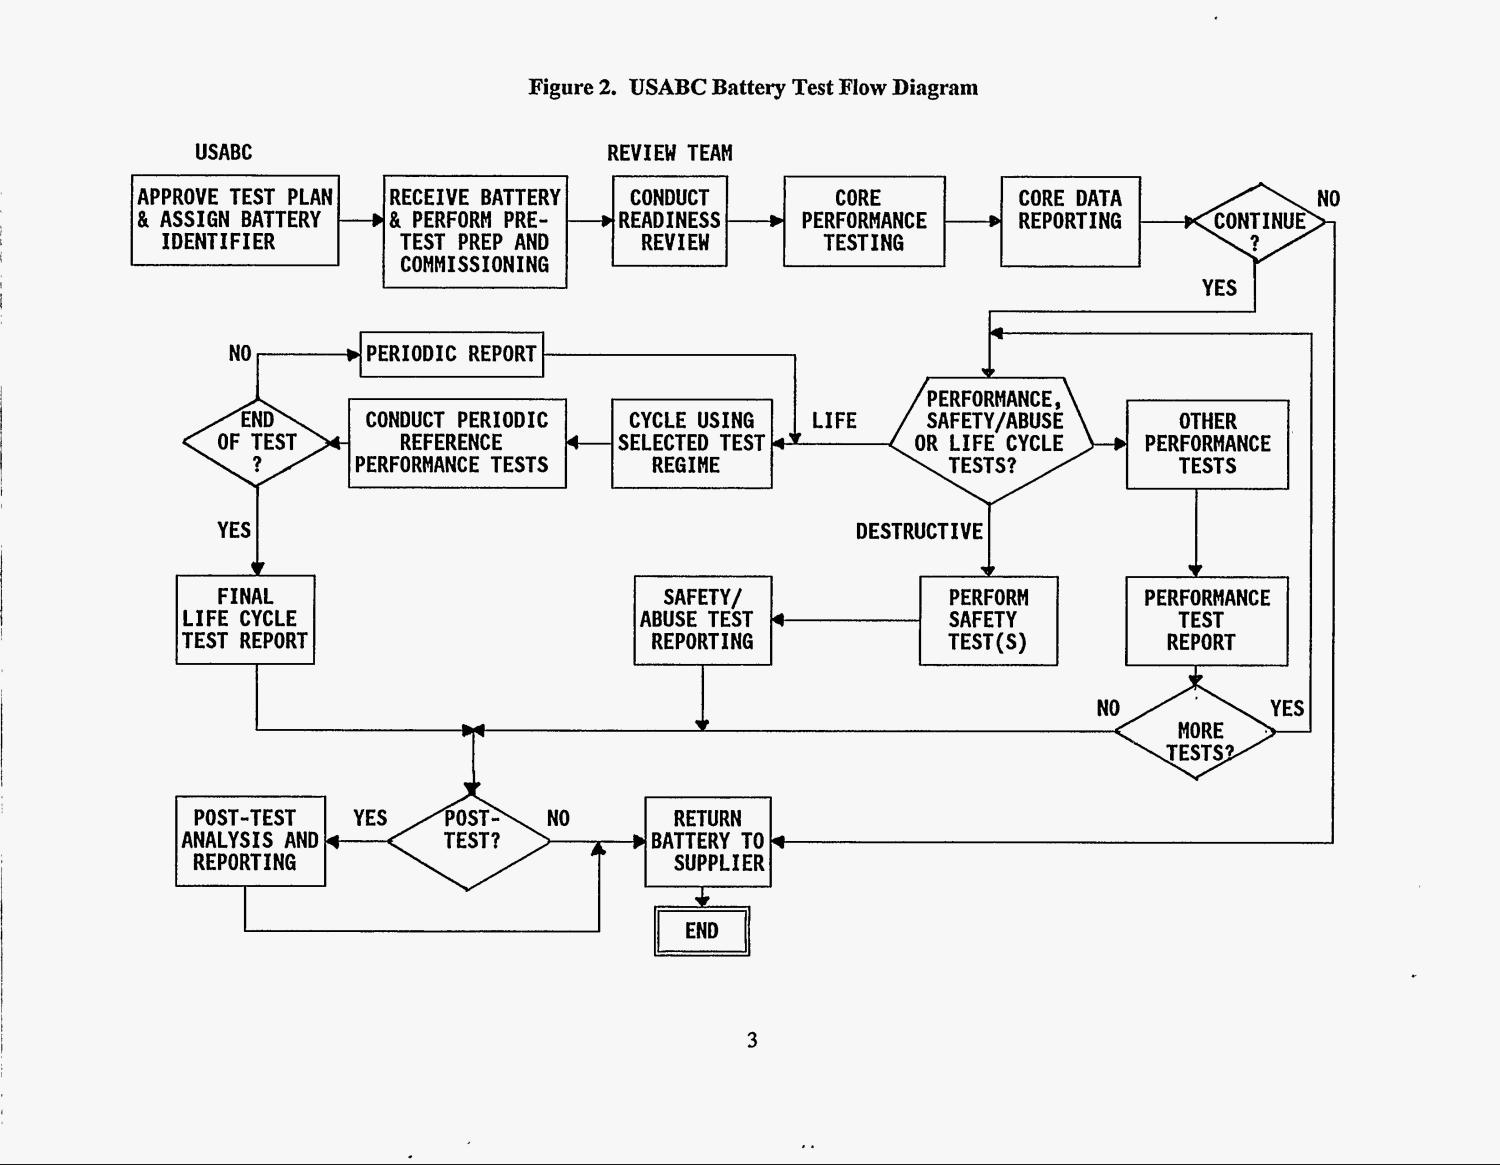 USABC electric vehicle Battery Test Procedures Manual. Revision 2